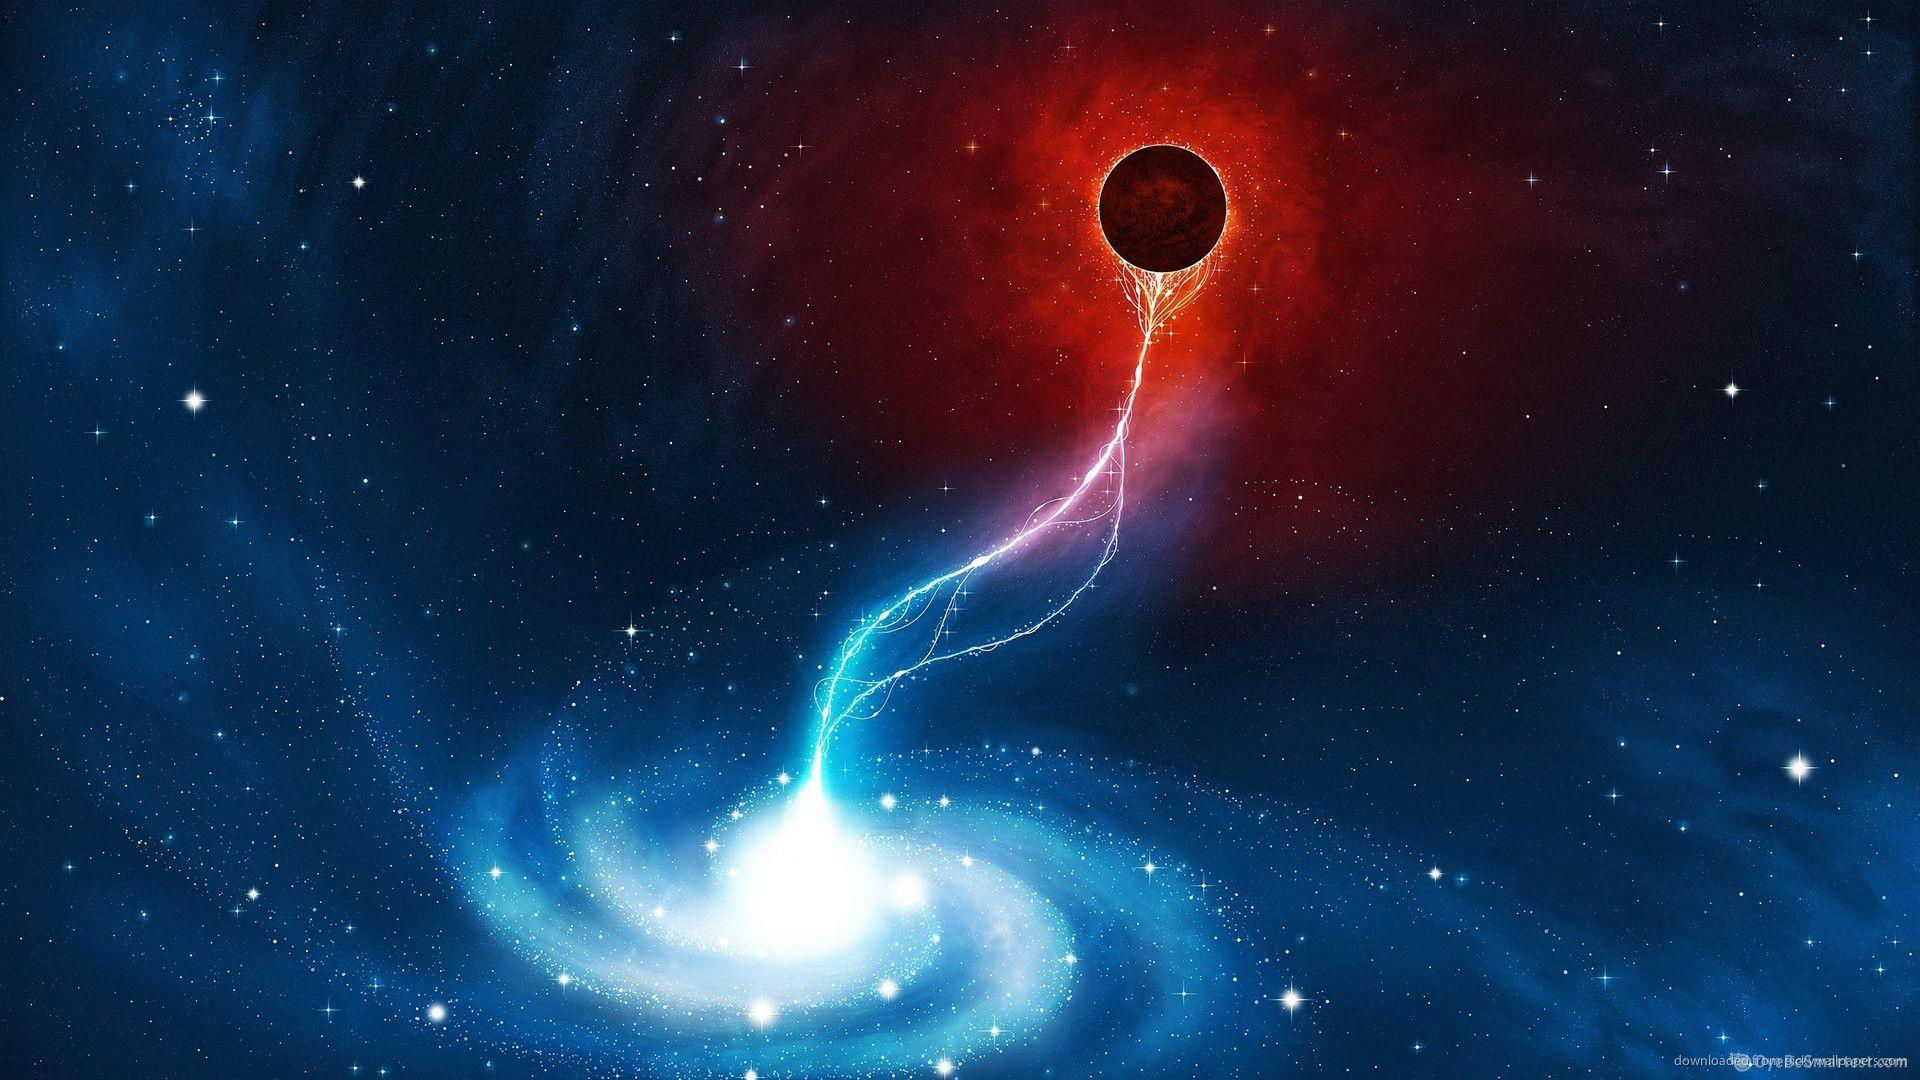 Ð black hole hd wallpapers nature wallpaper full free download